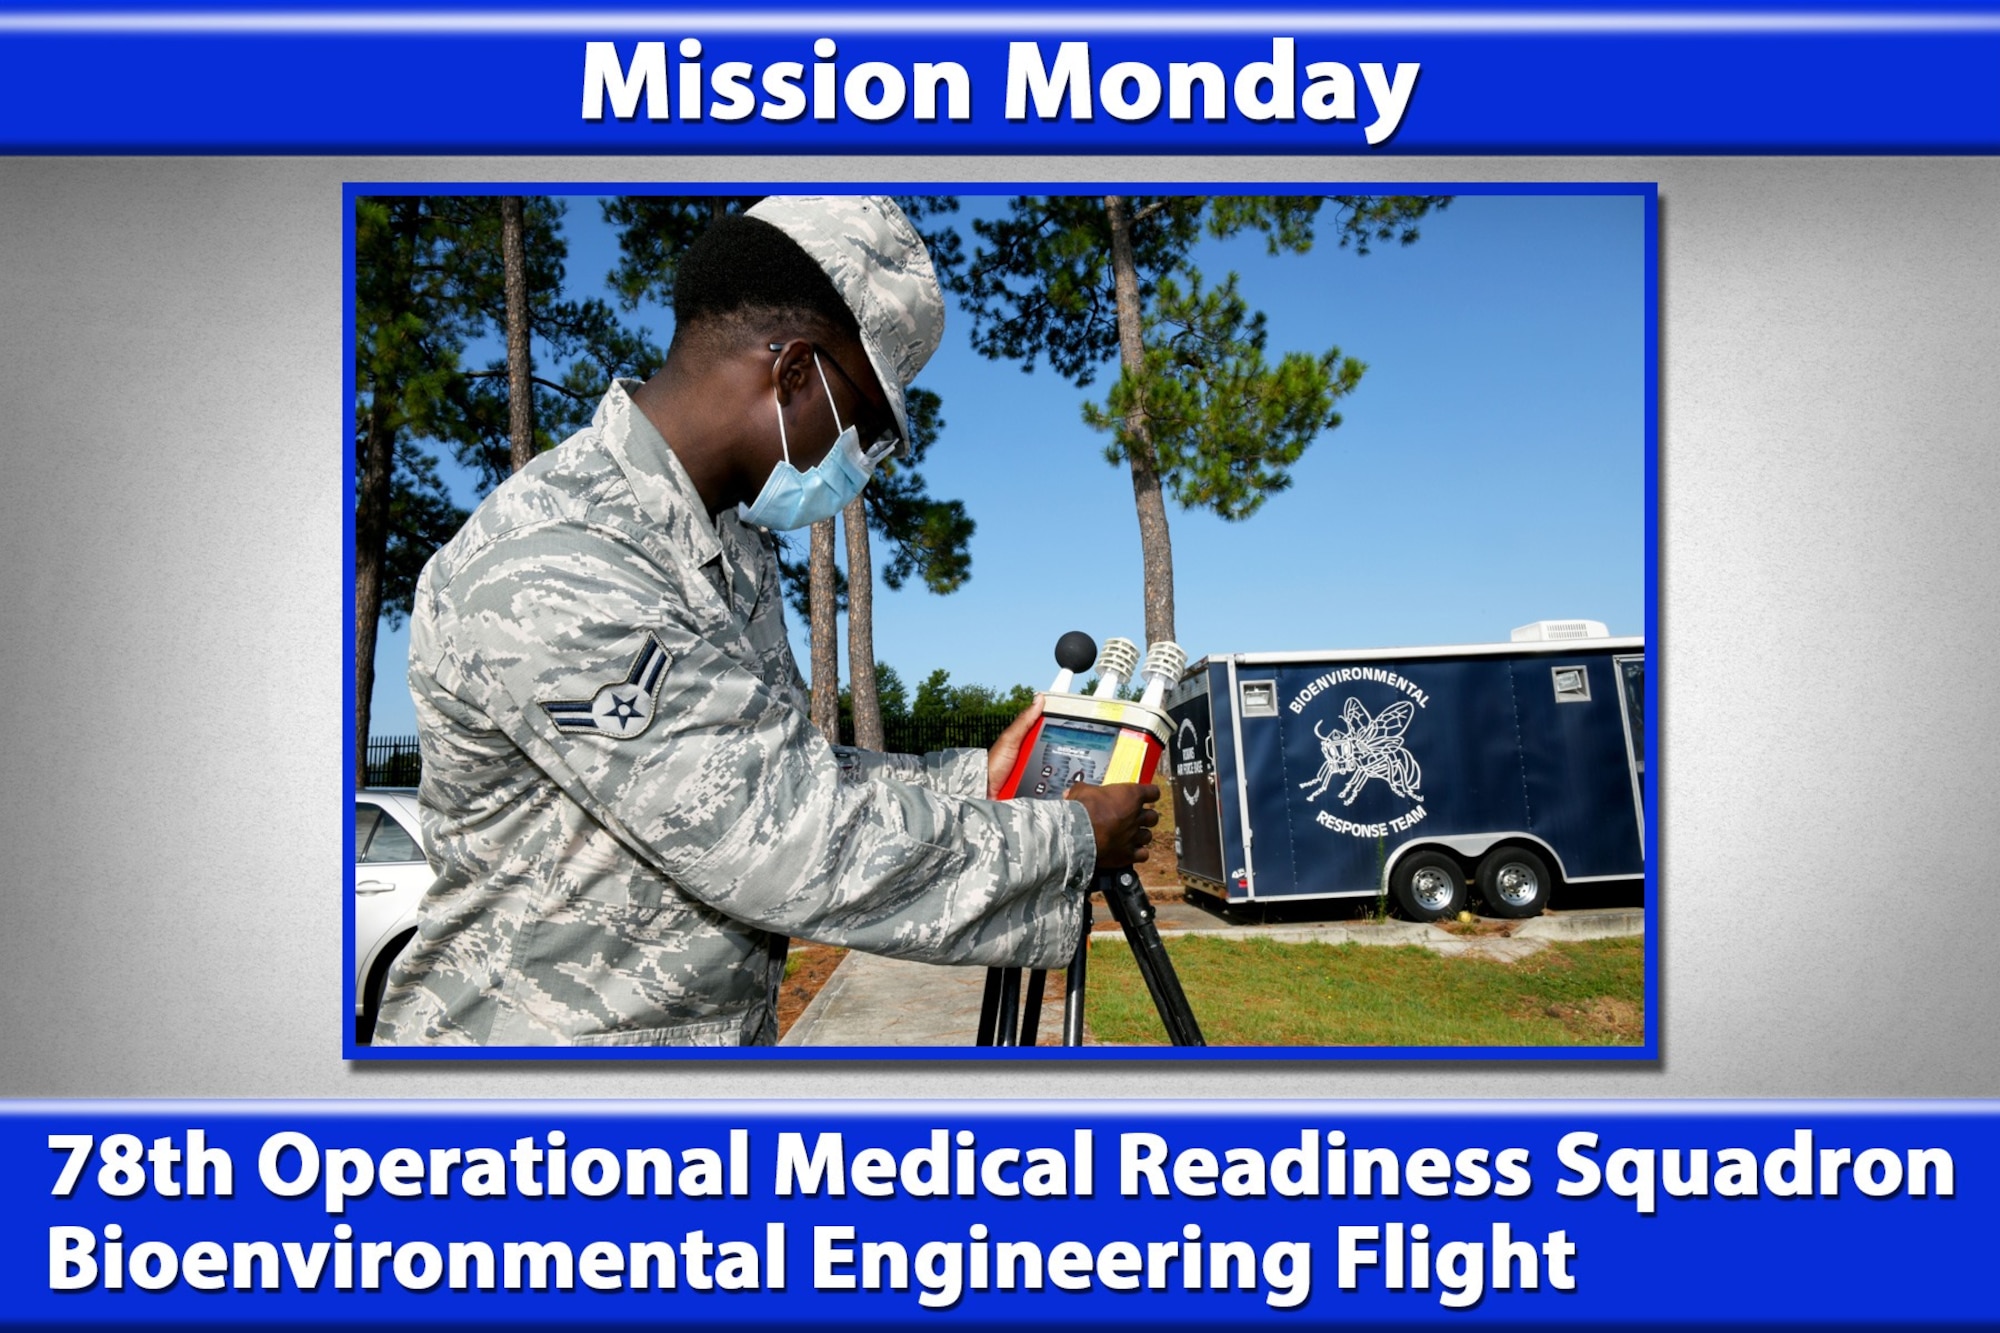 Mission Monday: 78th Operational Medical Readiness Squadron Bioenvironmental Engineering